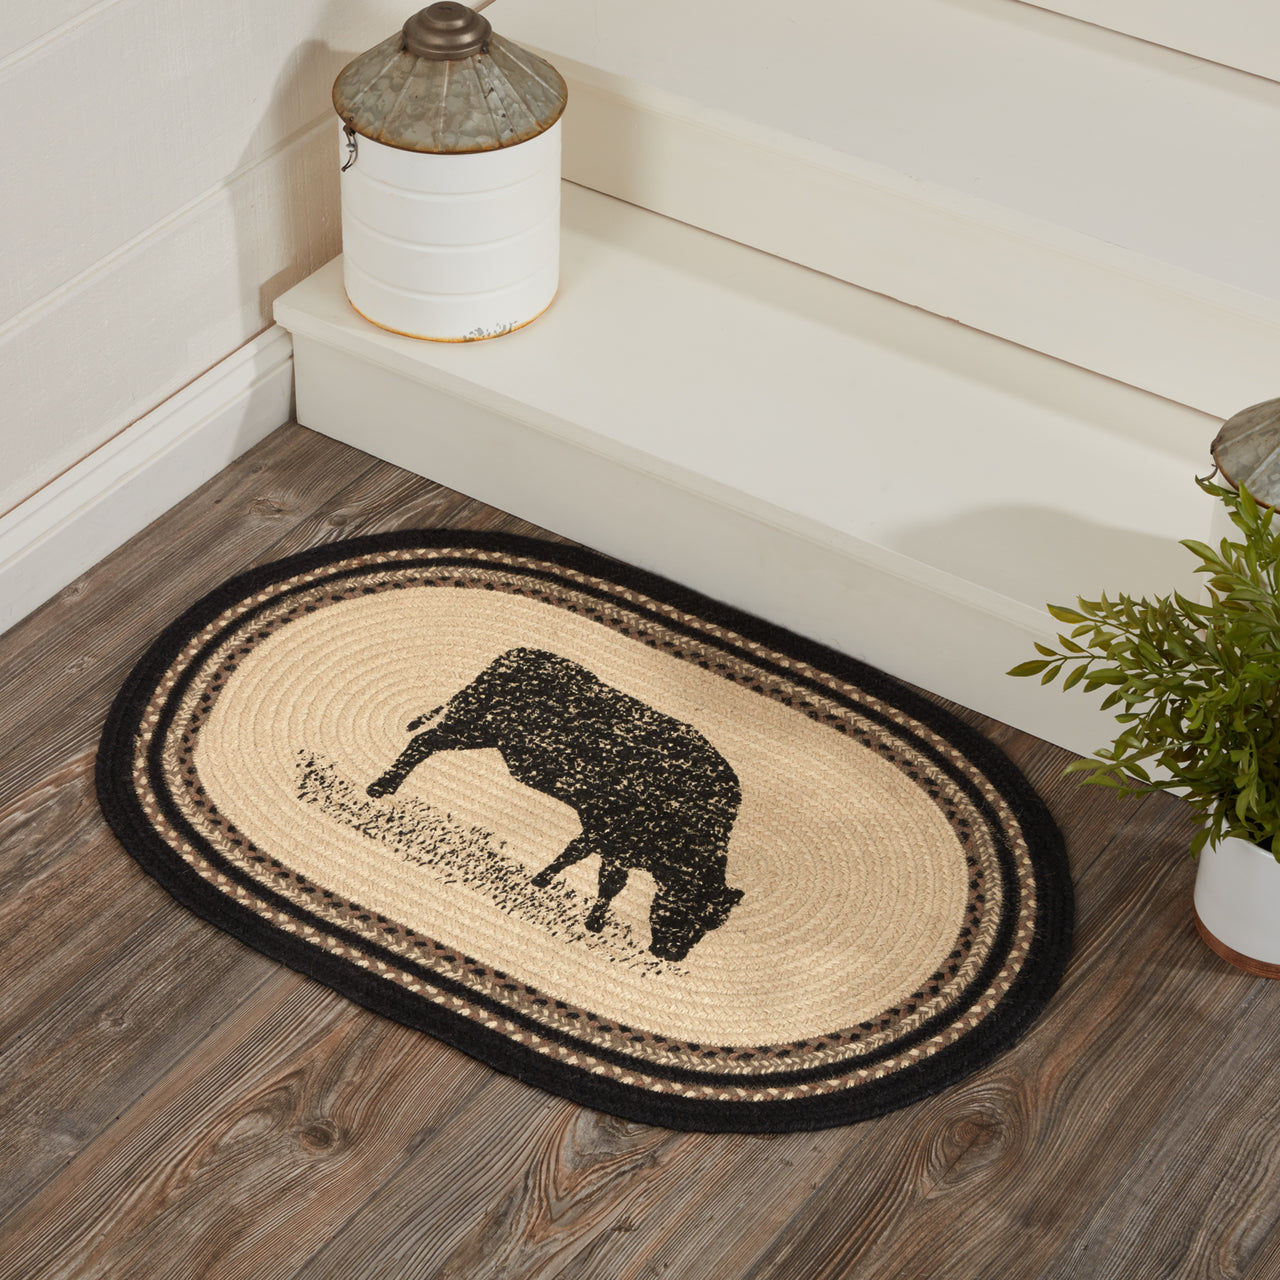 Sawyer Mill Charcoal Cow Jute Braided Rug Oval 20"x30" with Rug Pad VHC Brands